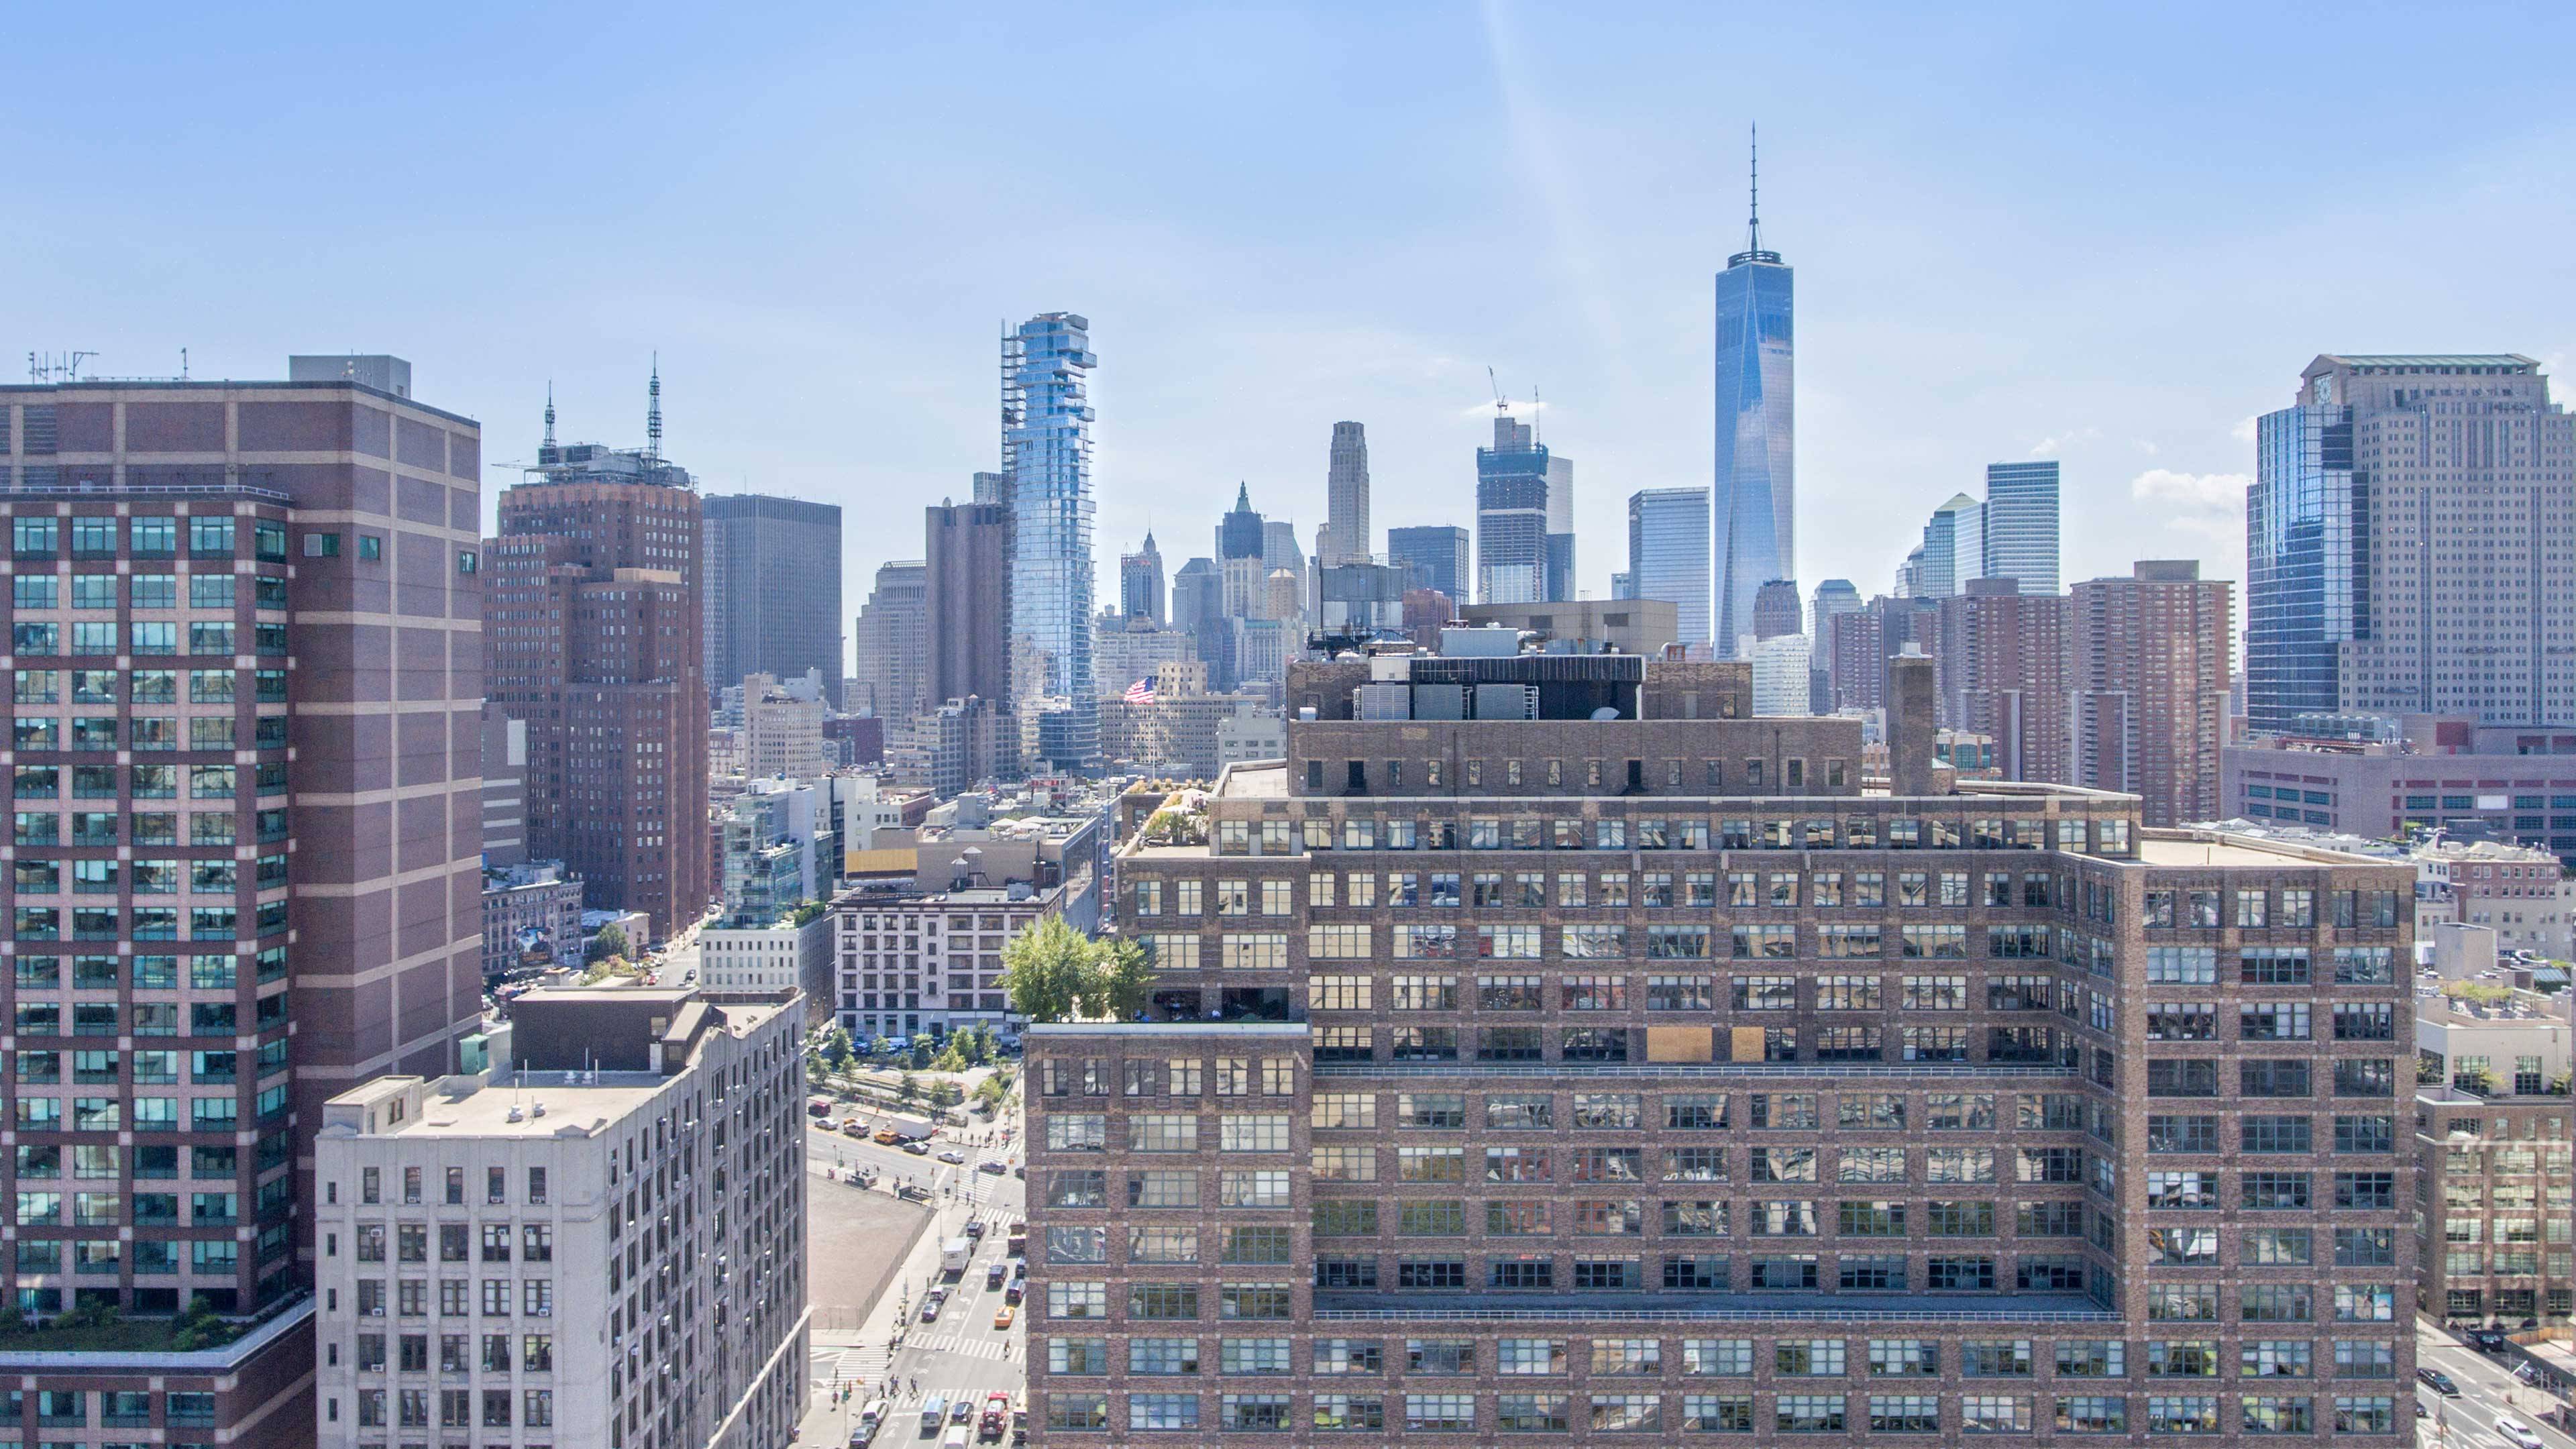 Closing Summer 2019. 570 Broome is a collection of fifty four contemporary residences that draw inspiration from the history and style of West SoHo.